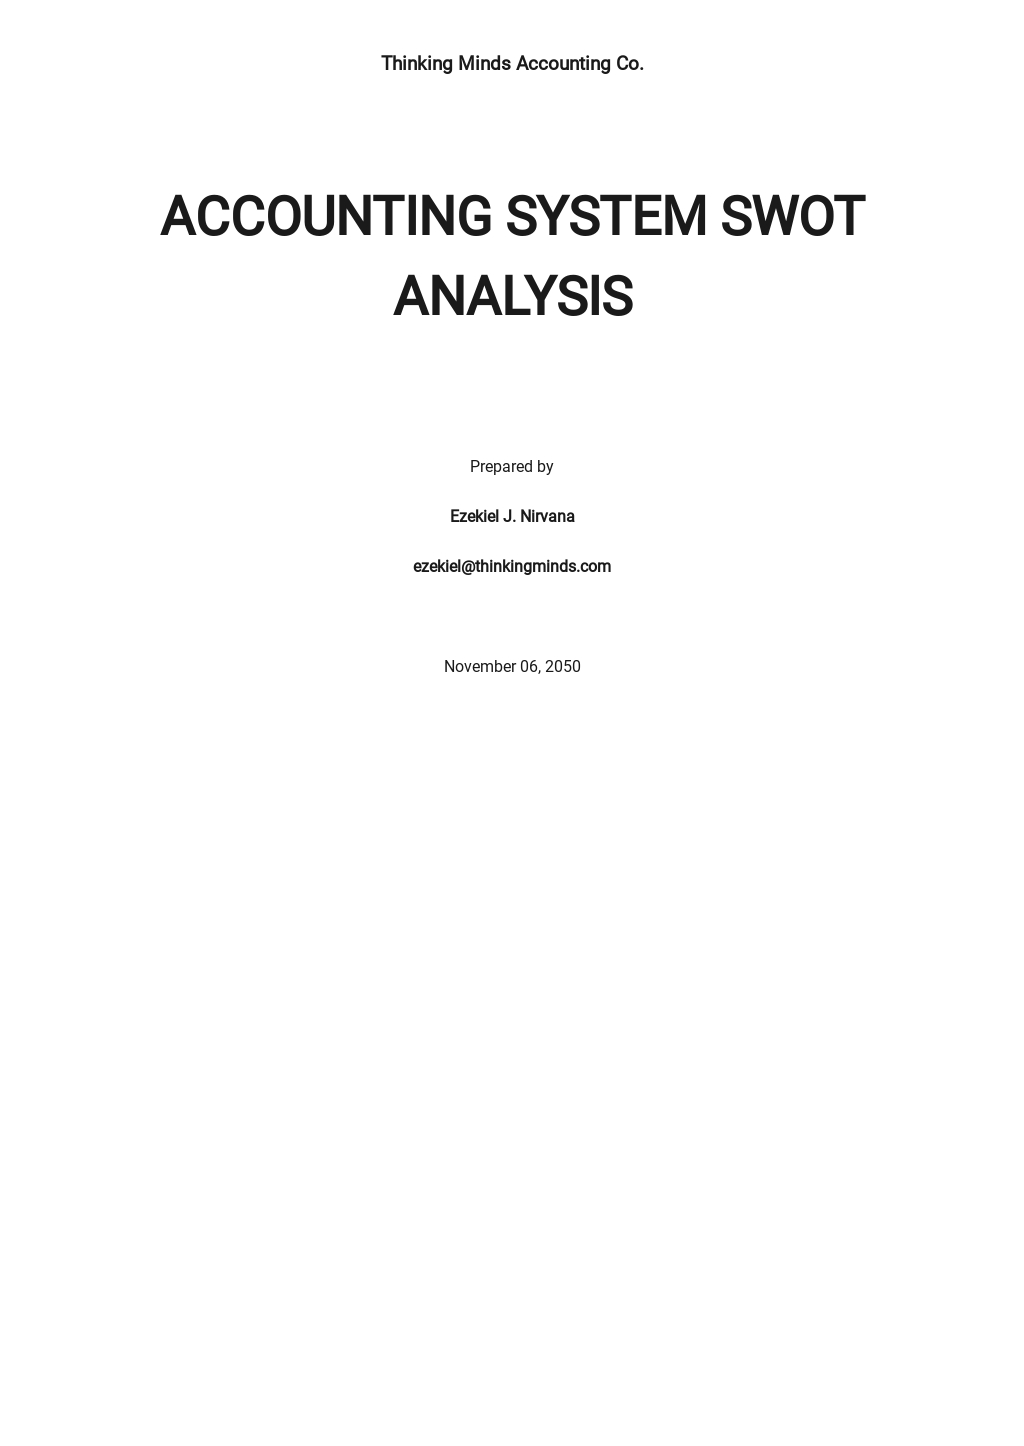 SWOT Analysis for Template Accounting.jpe